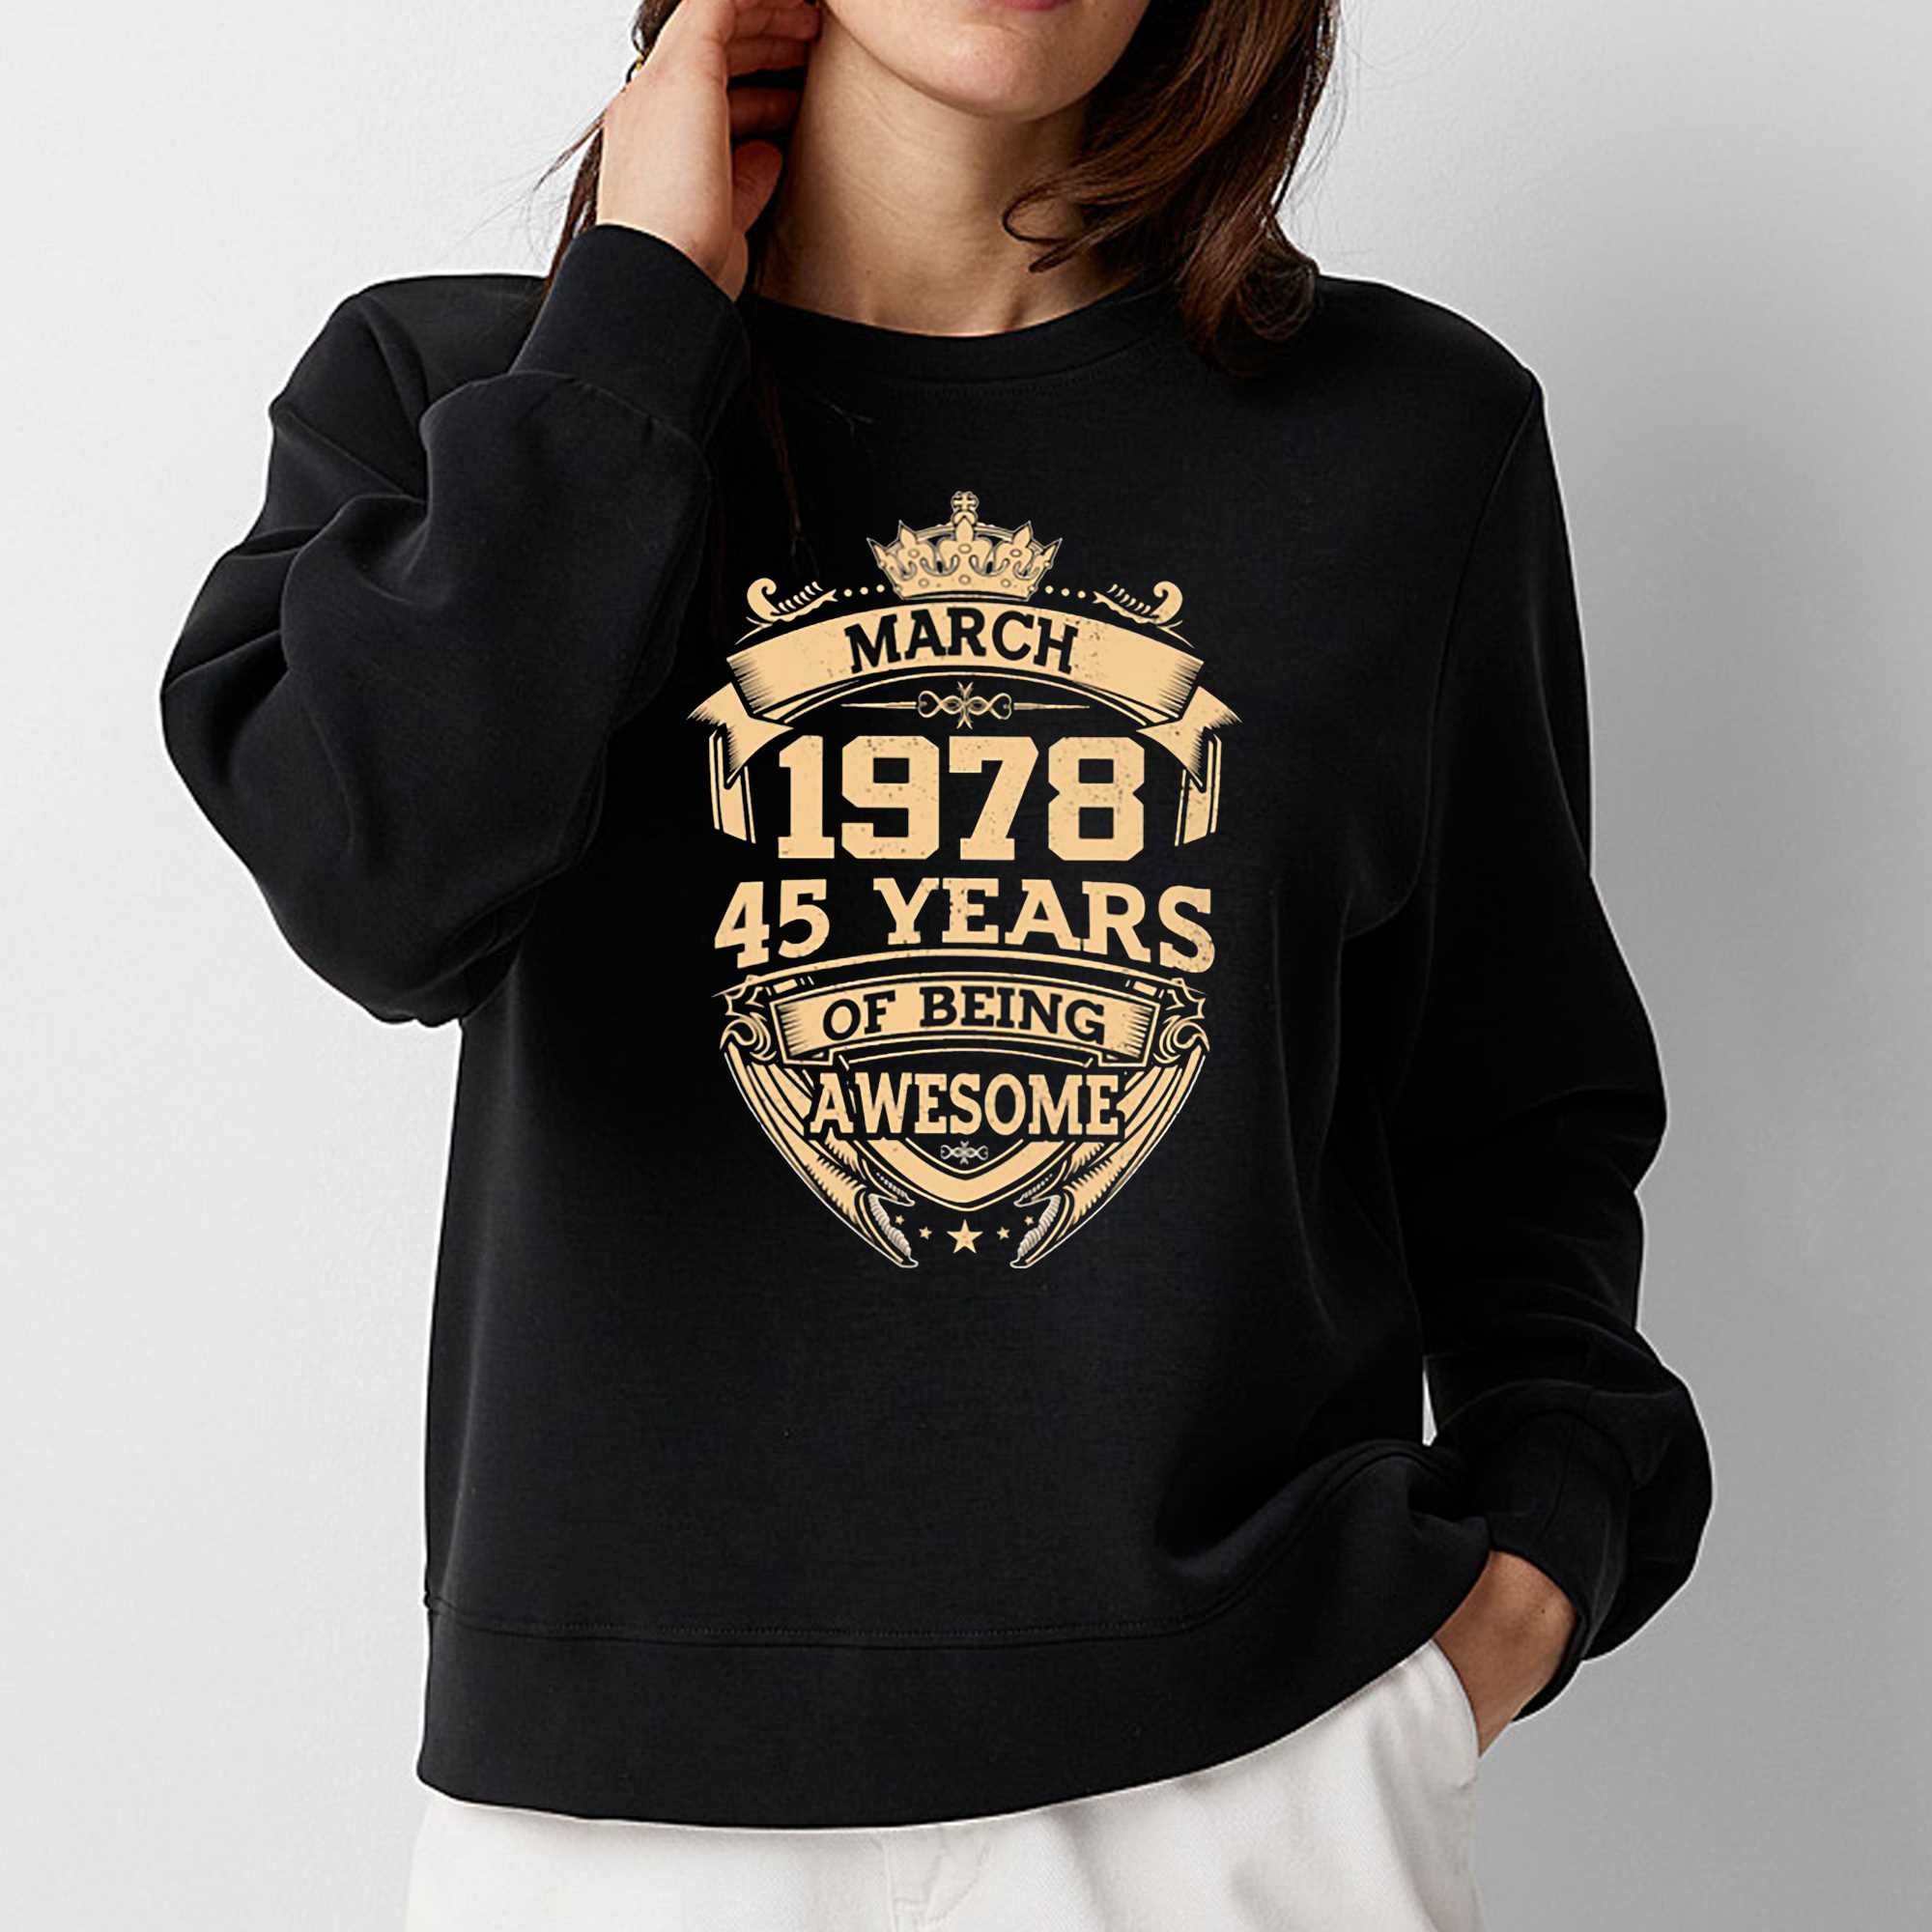 March 1978 45 Years Of Being Awesome Shirt 